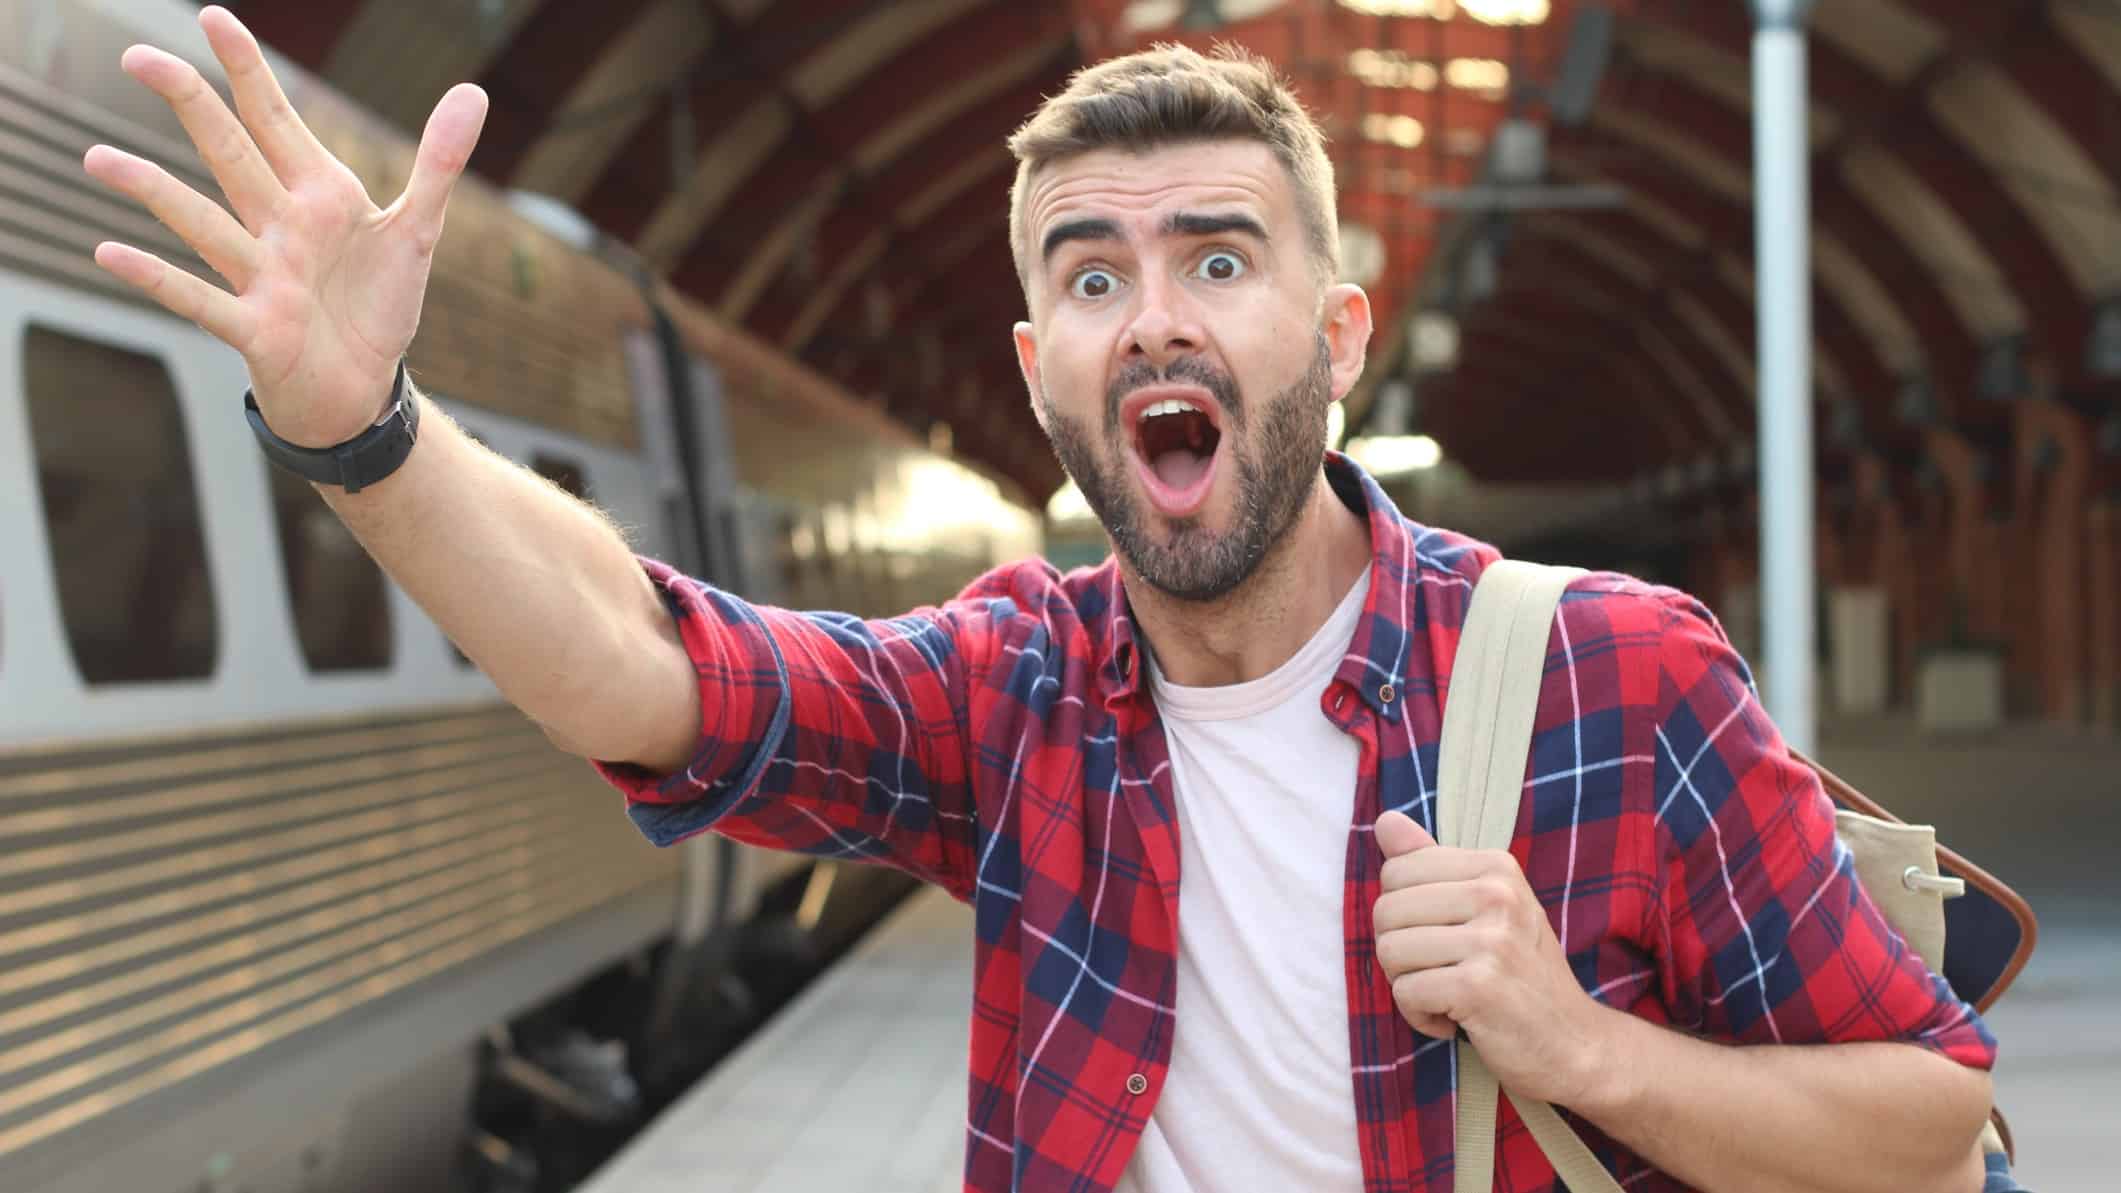 A man holds his hand out and yells for a train to wait for him on a train platform with the train in the background.